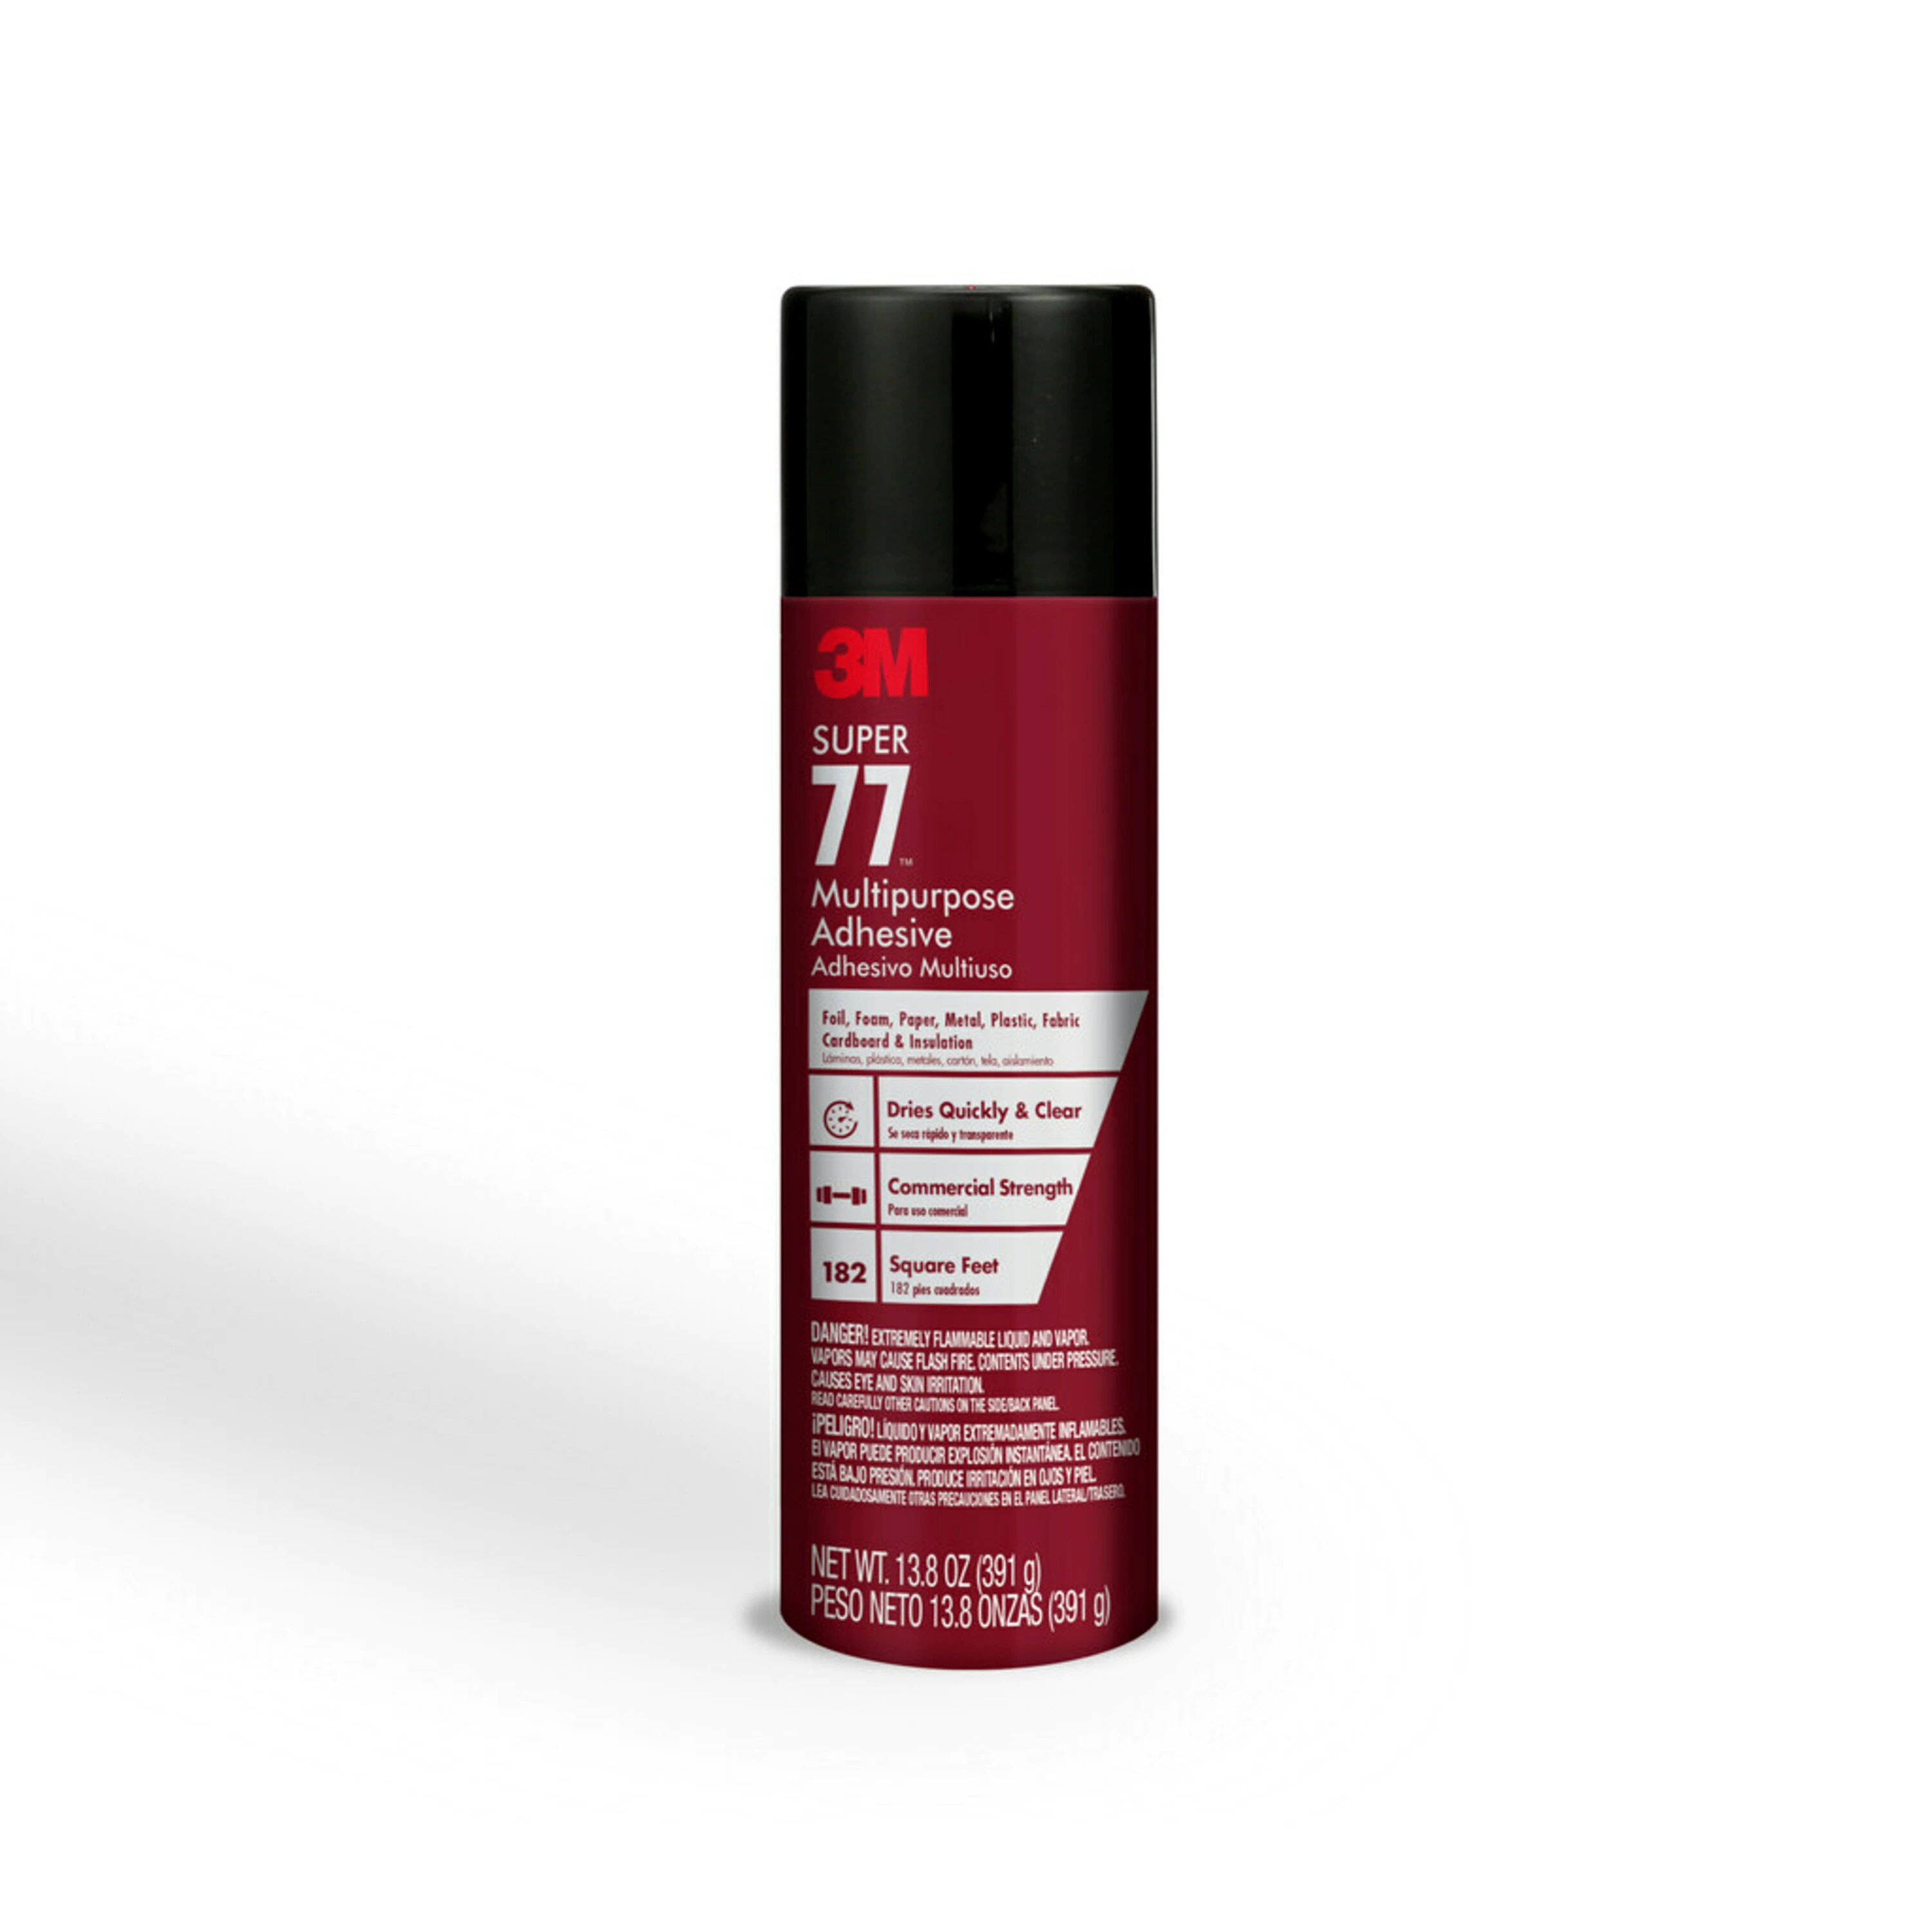 3M Super 77 Spray Adhesive Classic 13.8 Oz 12 Cans for sale online